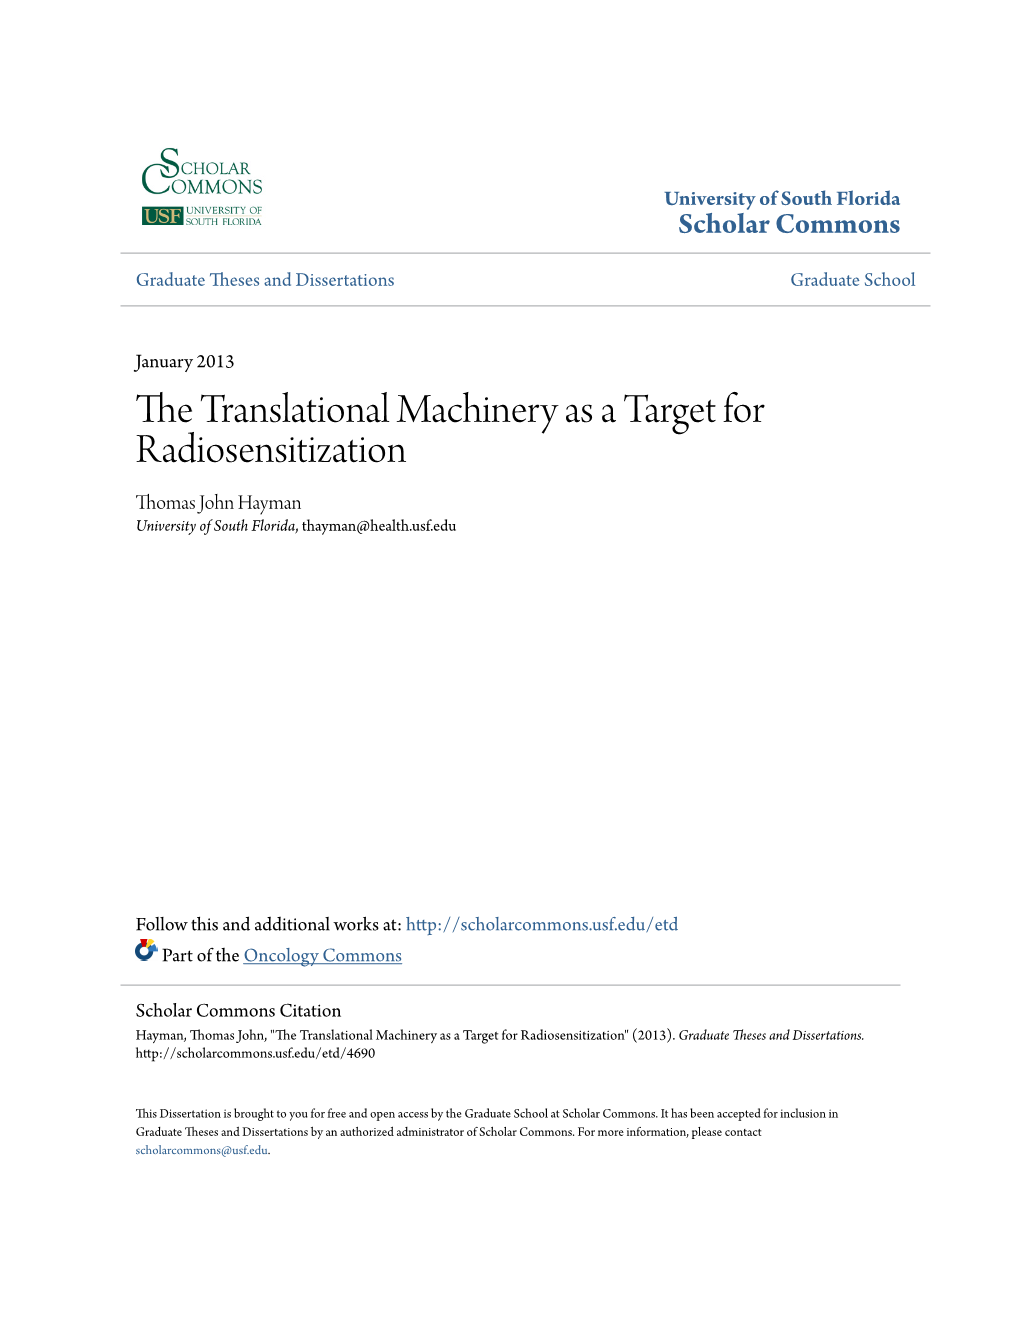 The Translational Machinery As a Target for Radiosensitization